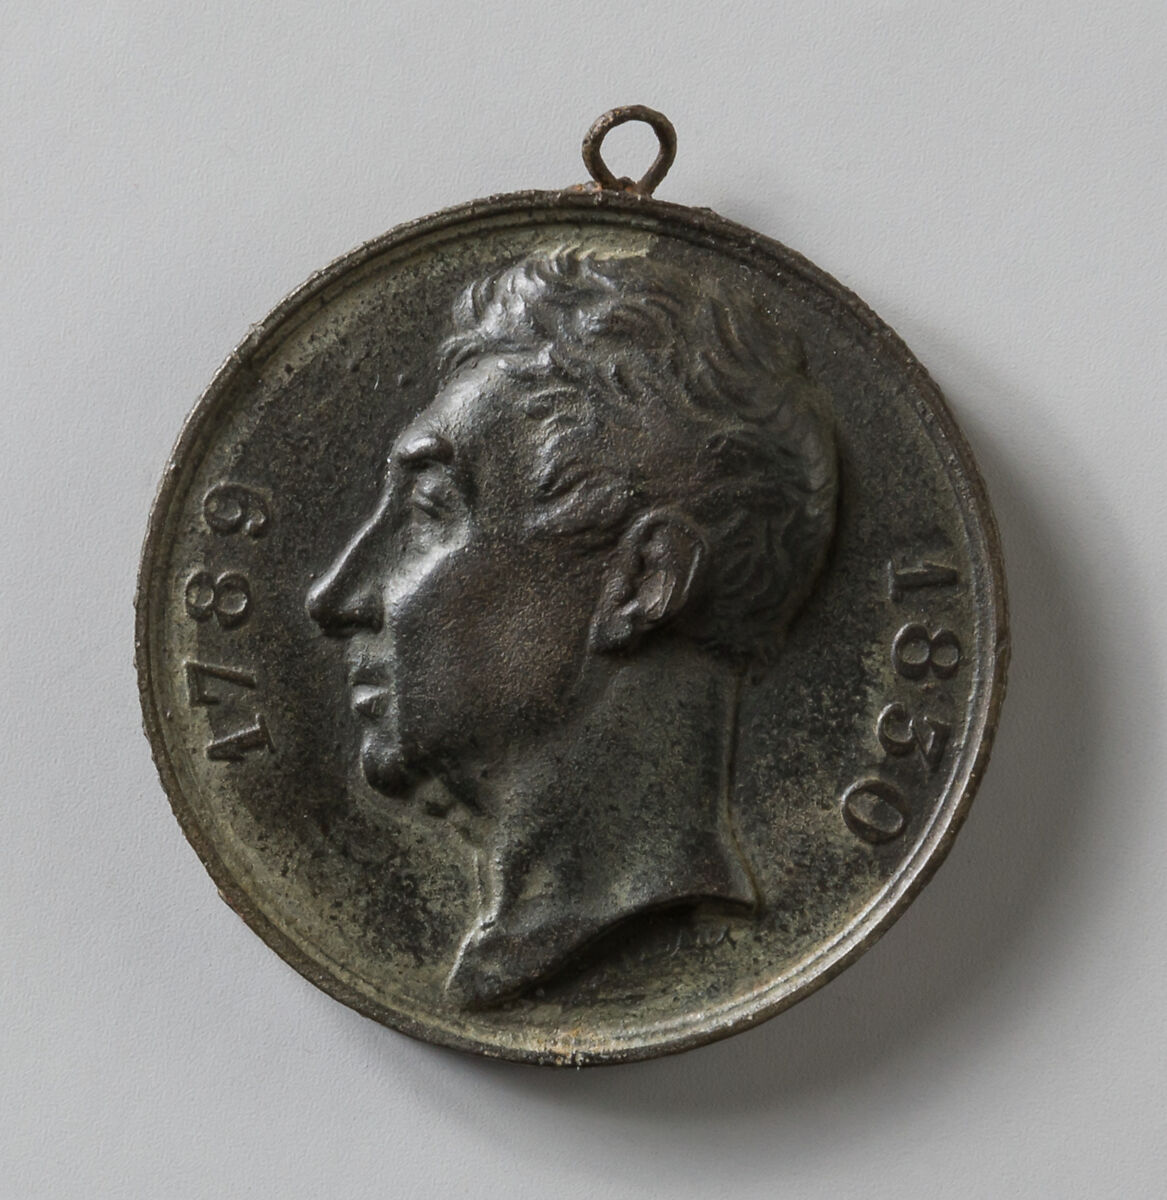 Medal of the Constituency of Meaux in Honor of Its Deputy, Jacques Edouard Gatteaux (French, Paris 1788–1881 Paris), Iron 